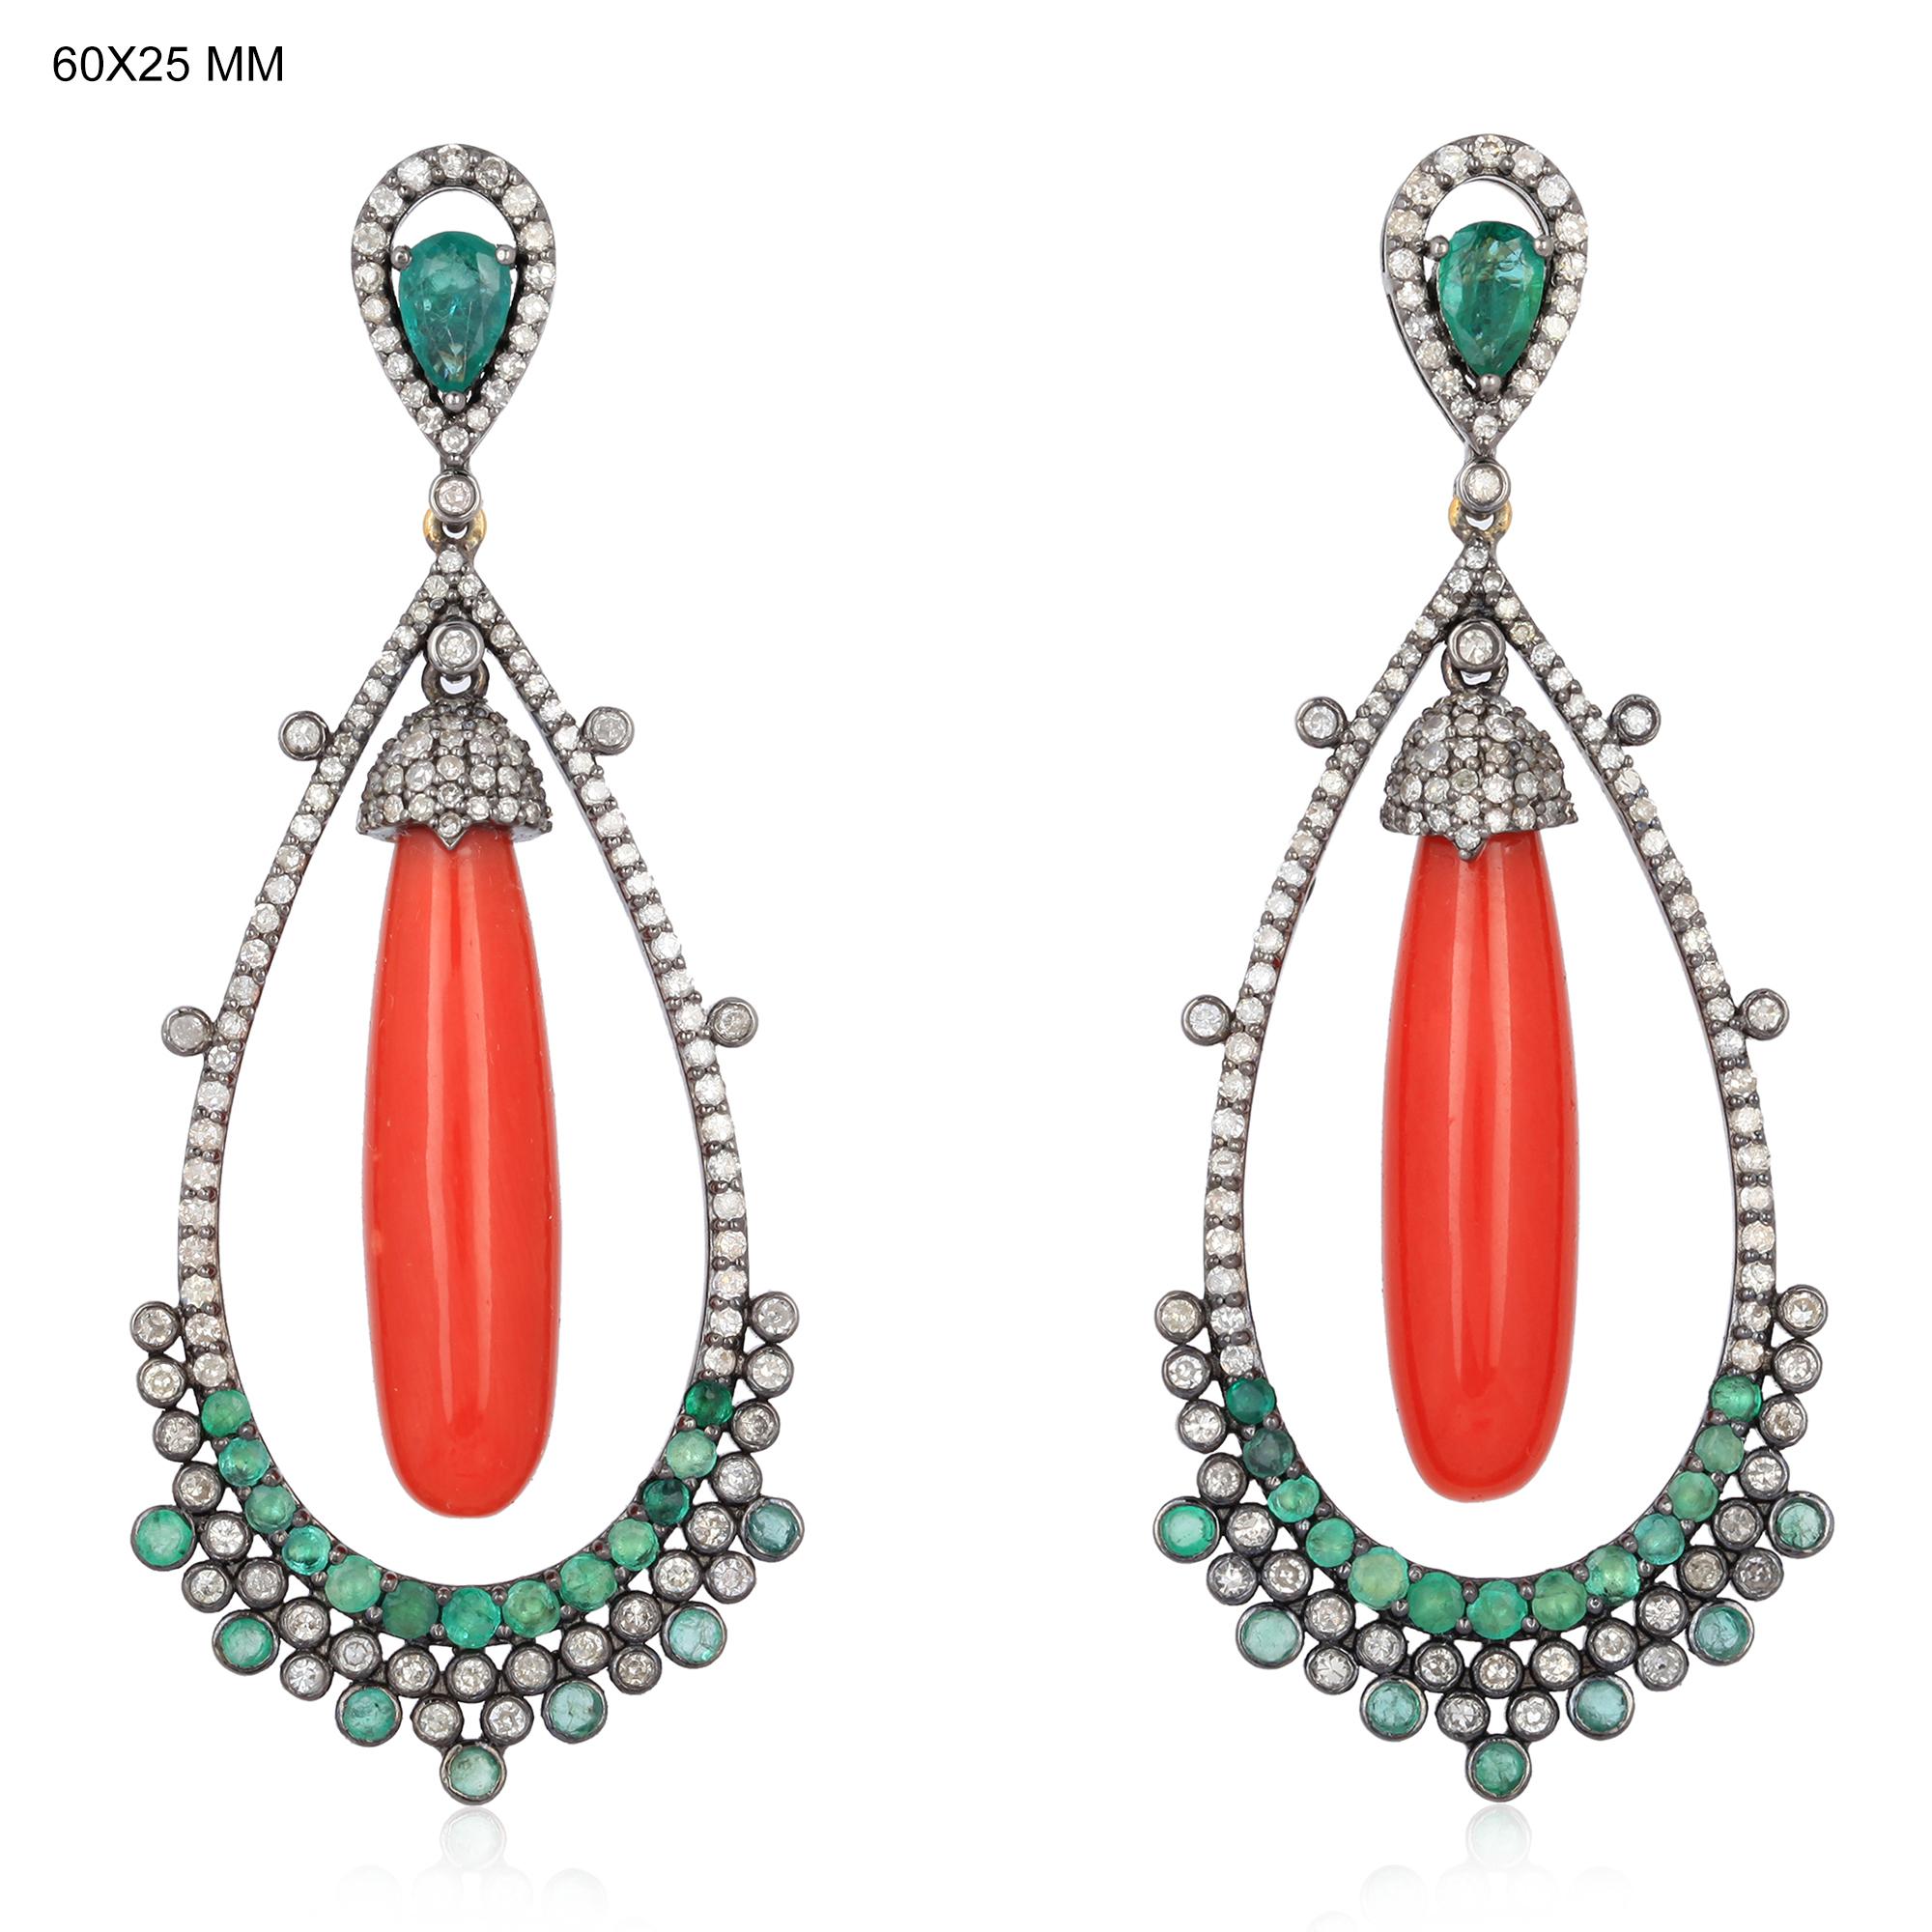 Cabochon 20.50 Carat Coral Emerald Diamond Earrings For Sale